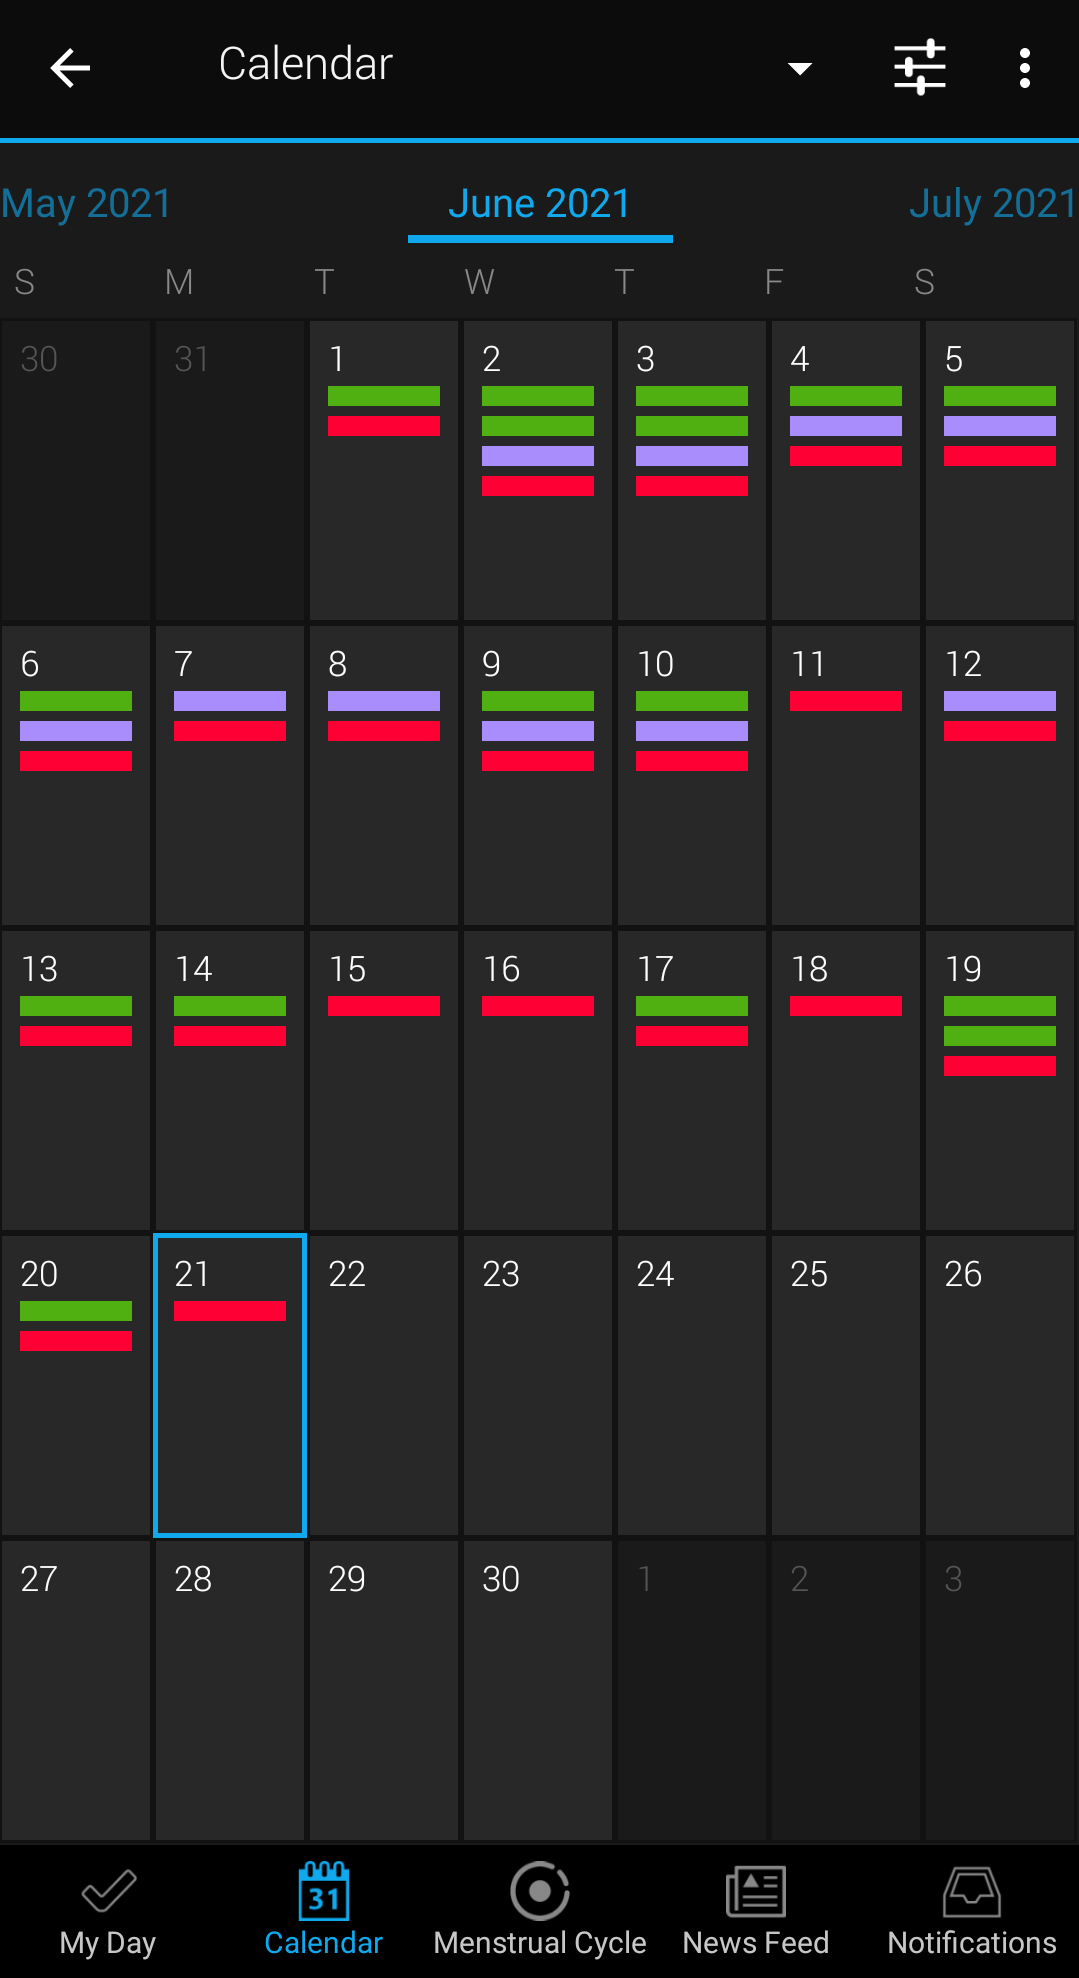 Garmin Connect App: What the Colored Bars on My Calendar? | Garmin Support